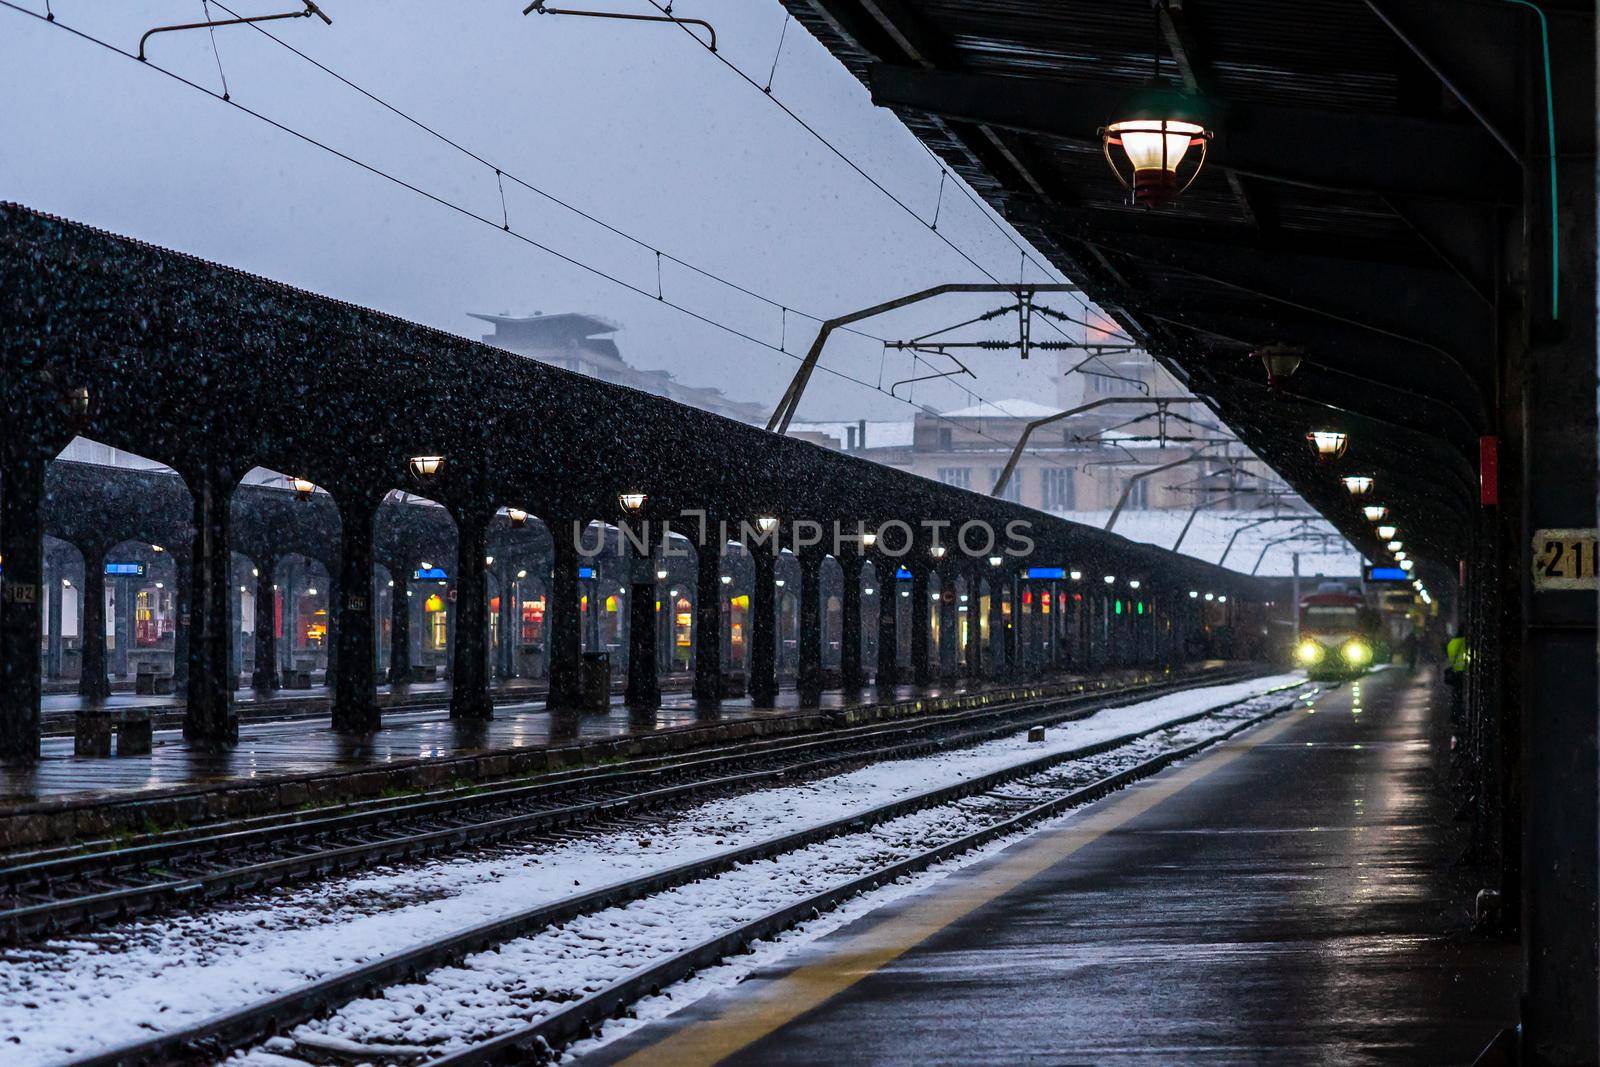 Northern Railway Station (Gara de Nord) during a cold and snowy day in Bucharest, Romania, 2021